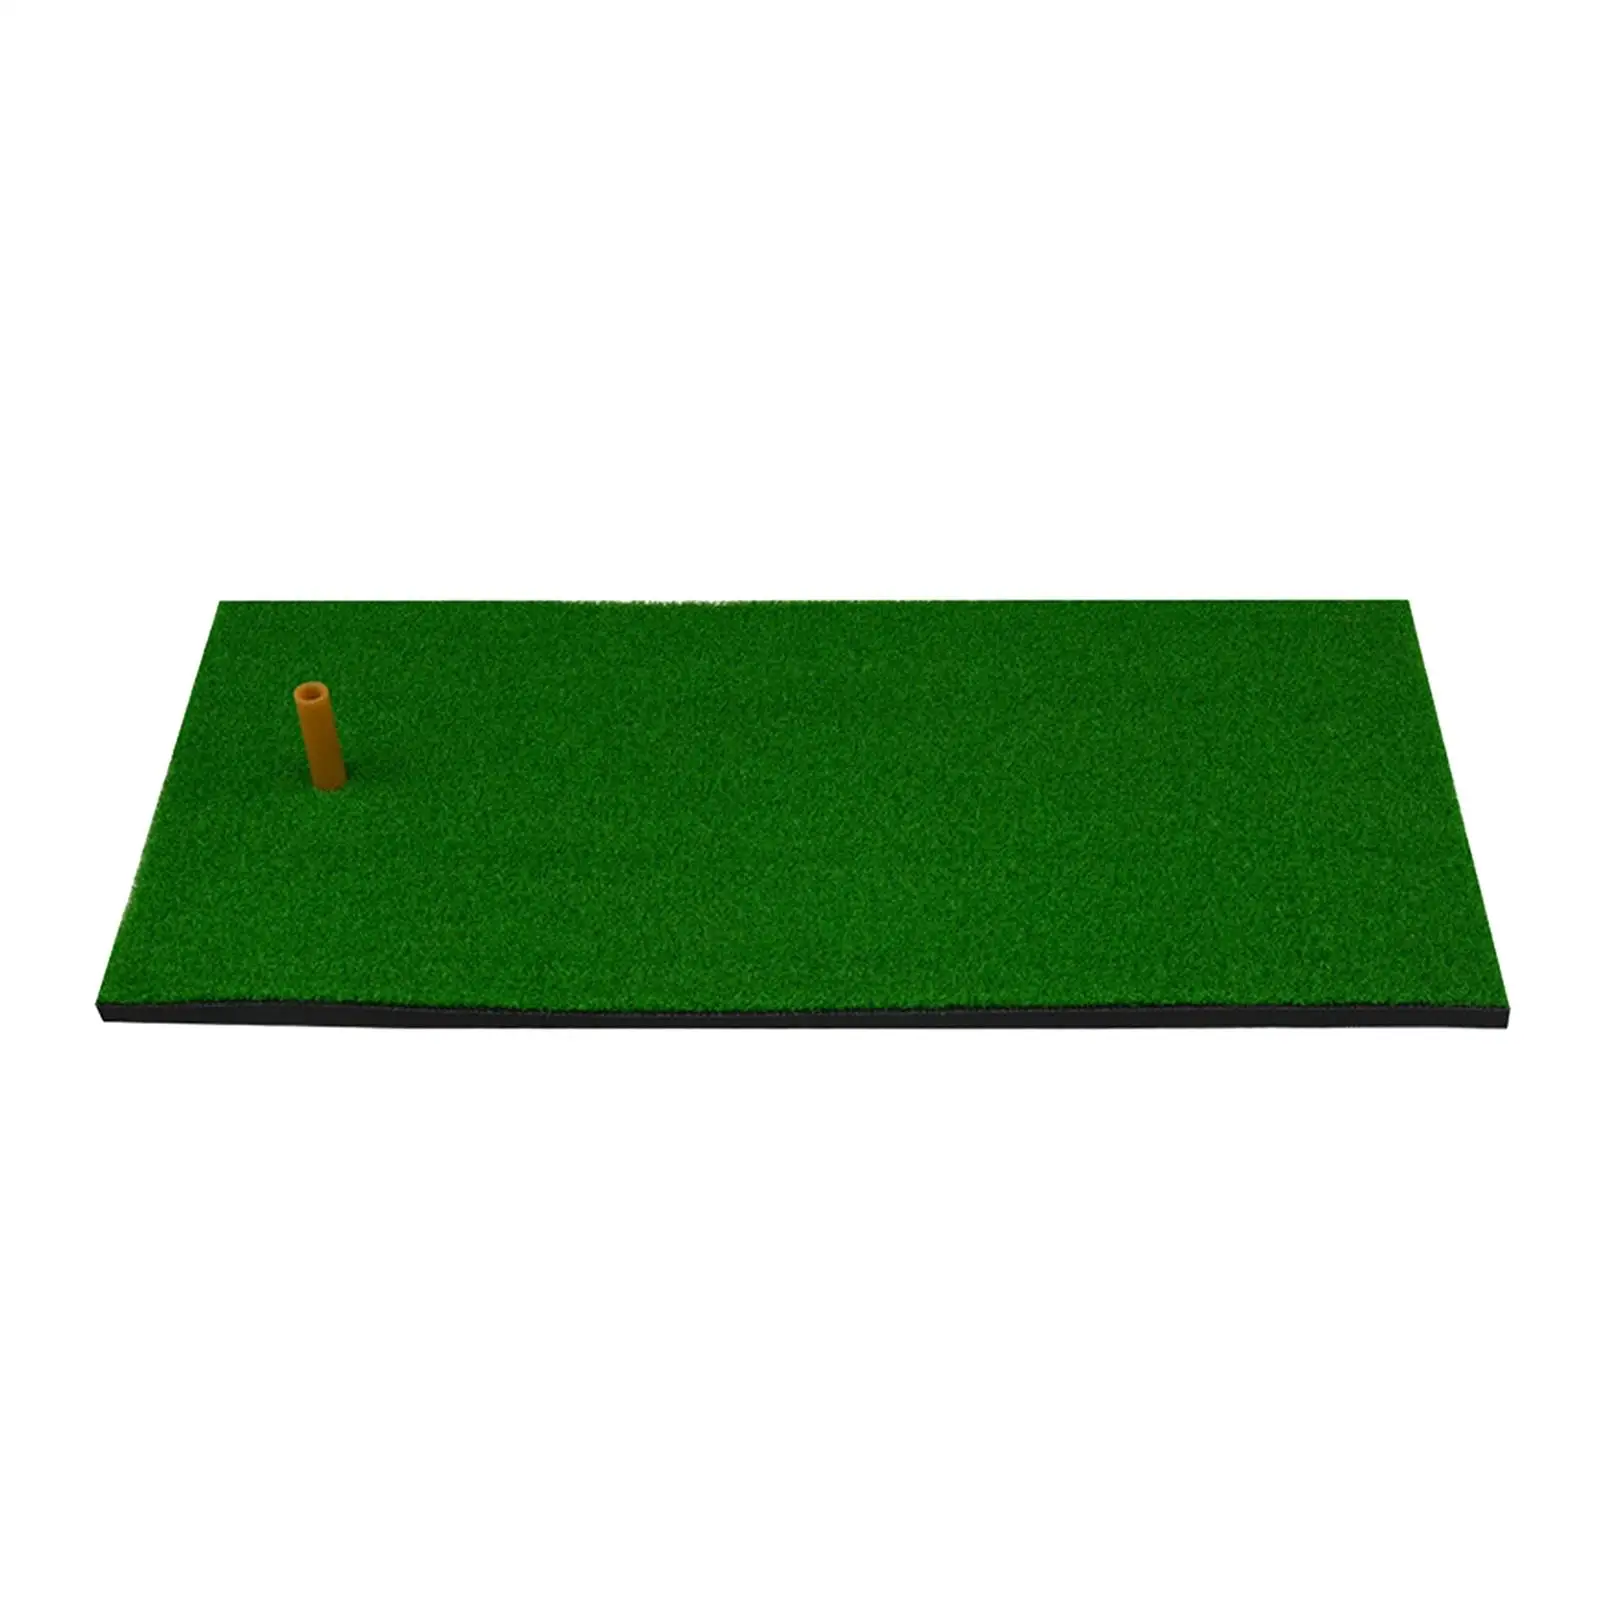 Golf Practice Hitting Net Indoor Backyard Home Chipping Swing  Golfing Accuracy Great Gifts for  Husband Women Kid Golfers